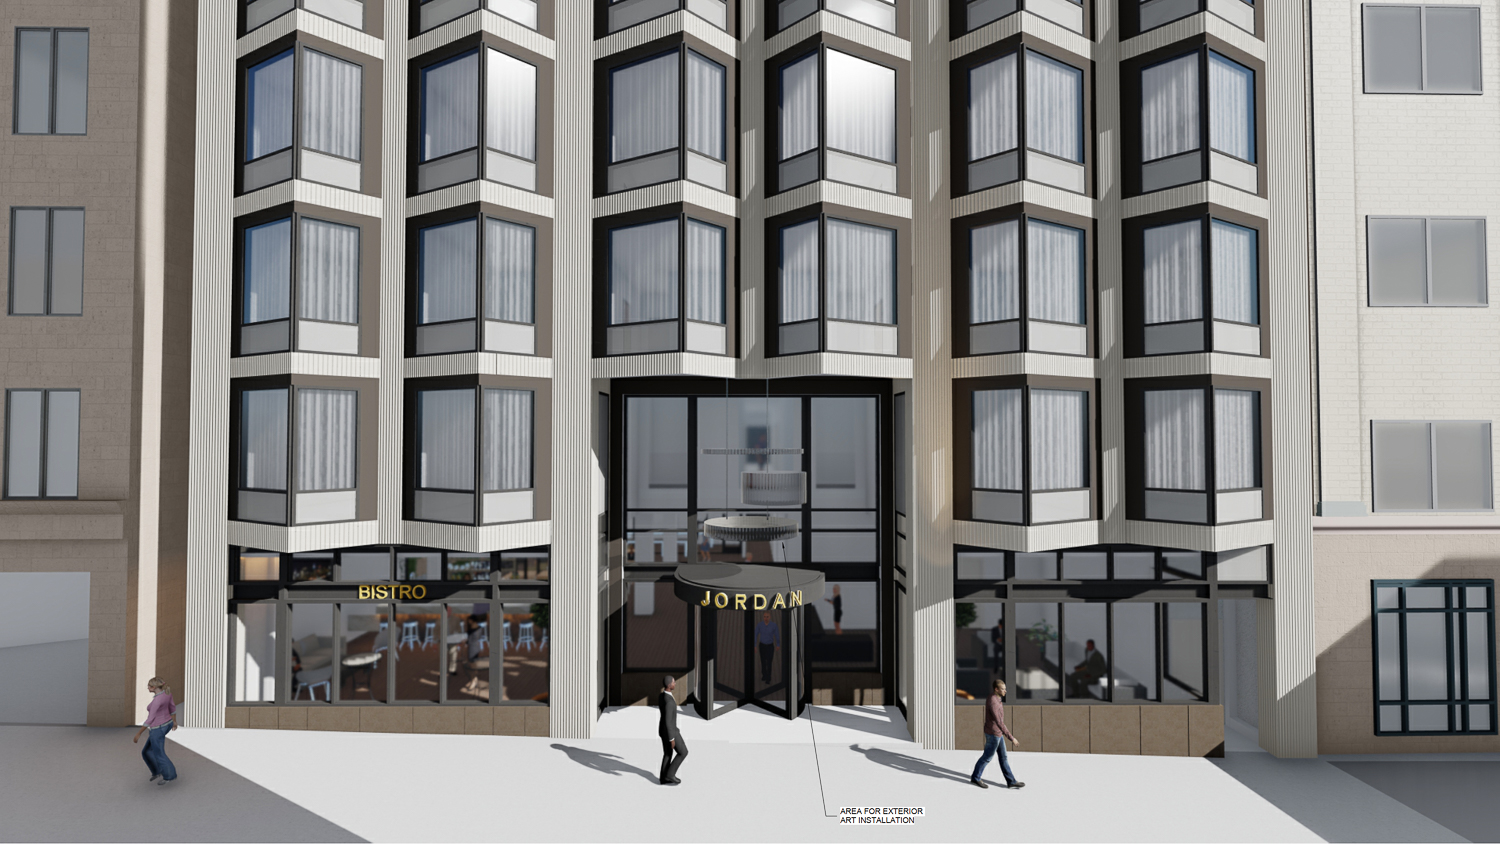 420 Sutter Street lobby view, rendering by Stanton Architecture